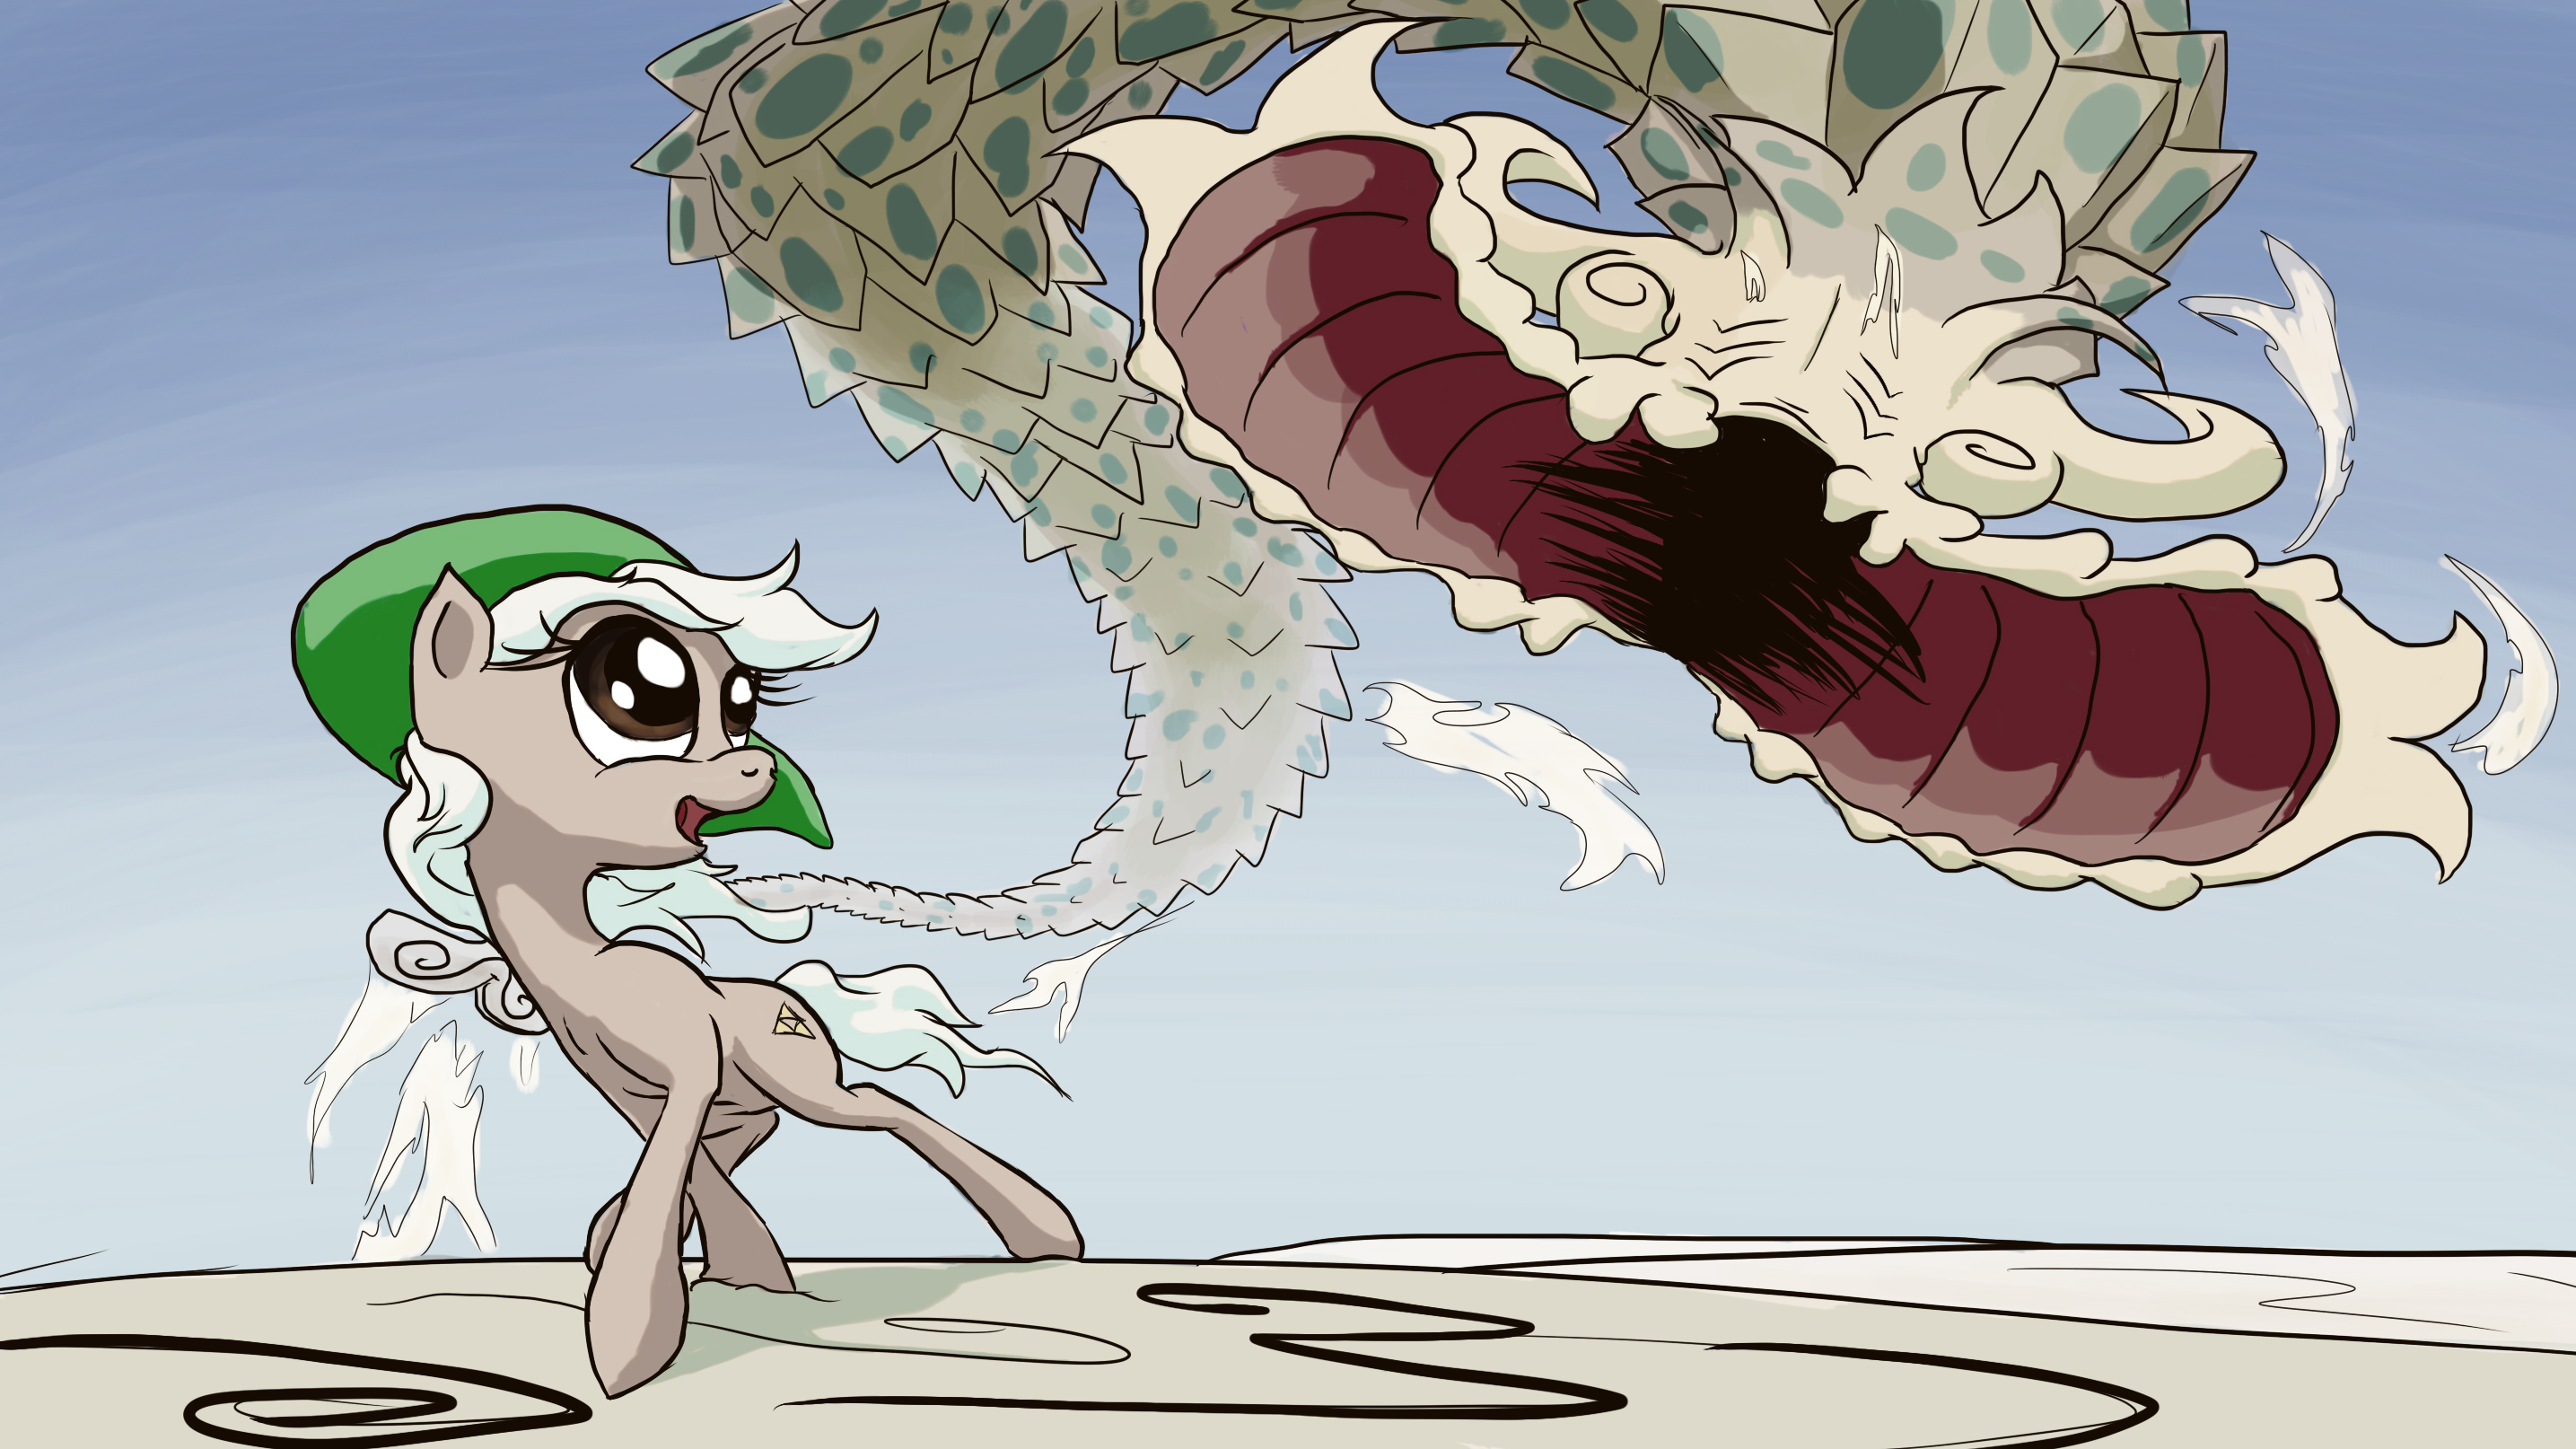 epone_and_giant_worm_thing_by_aaronmk-d8